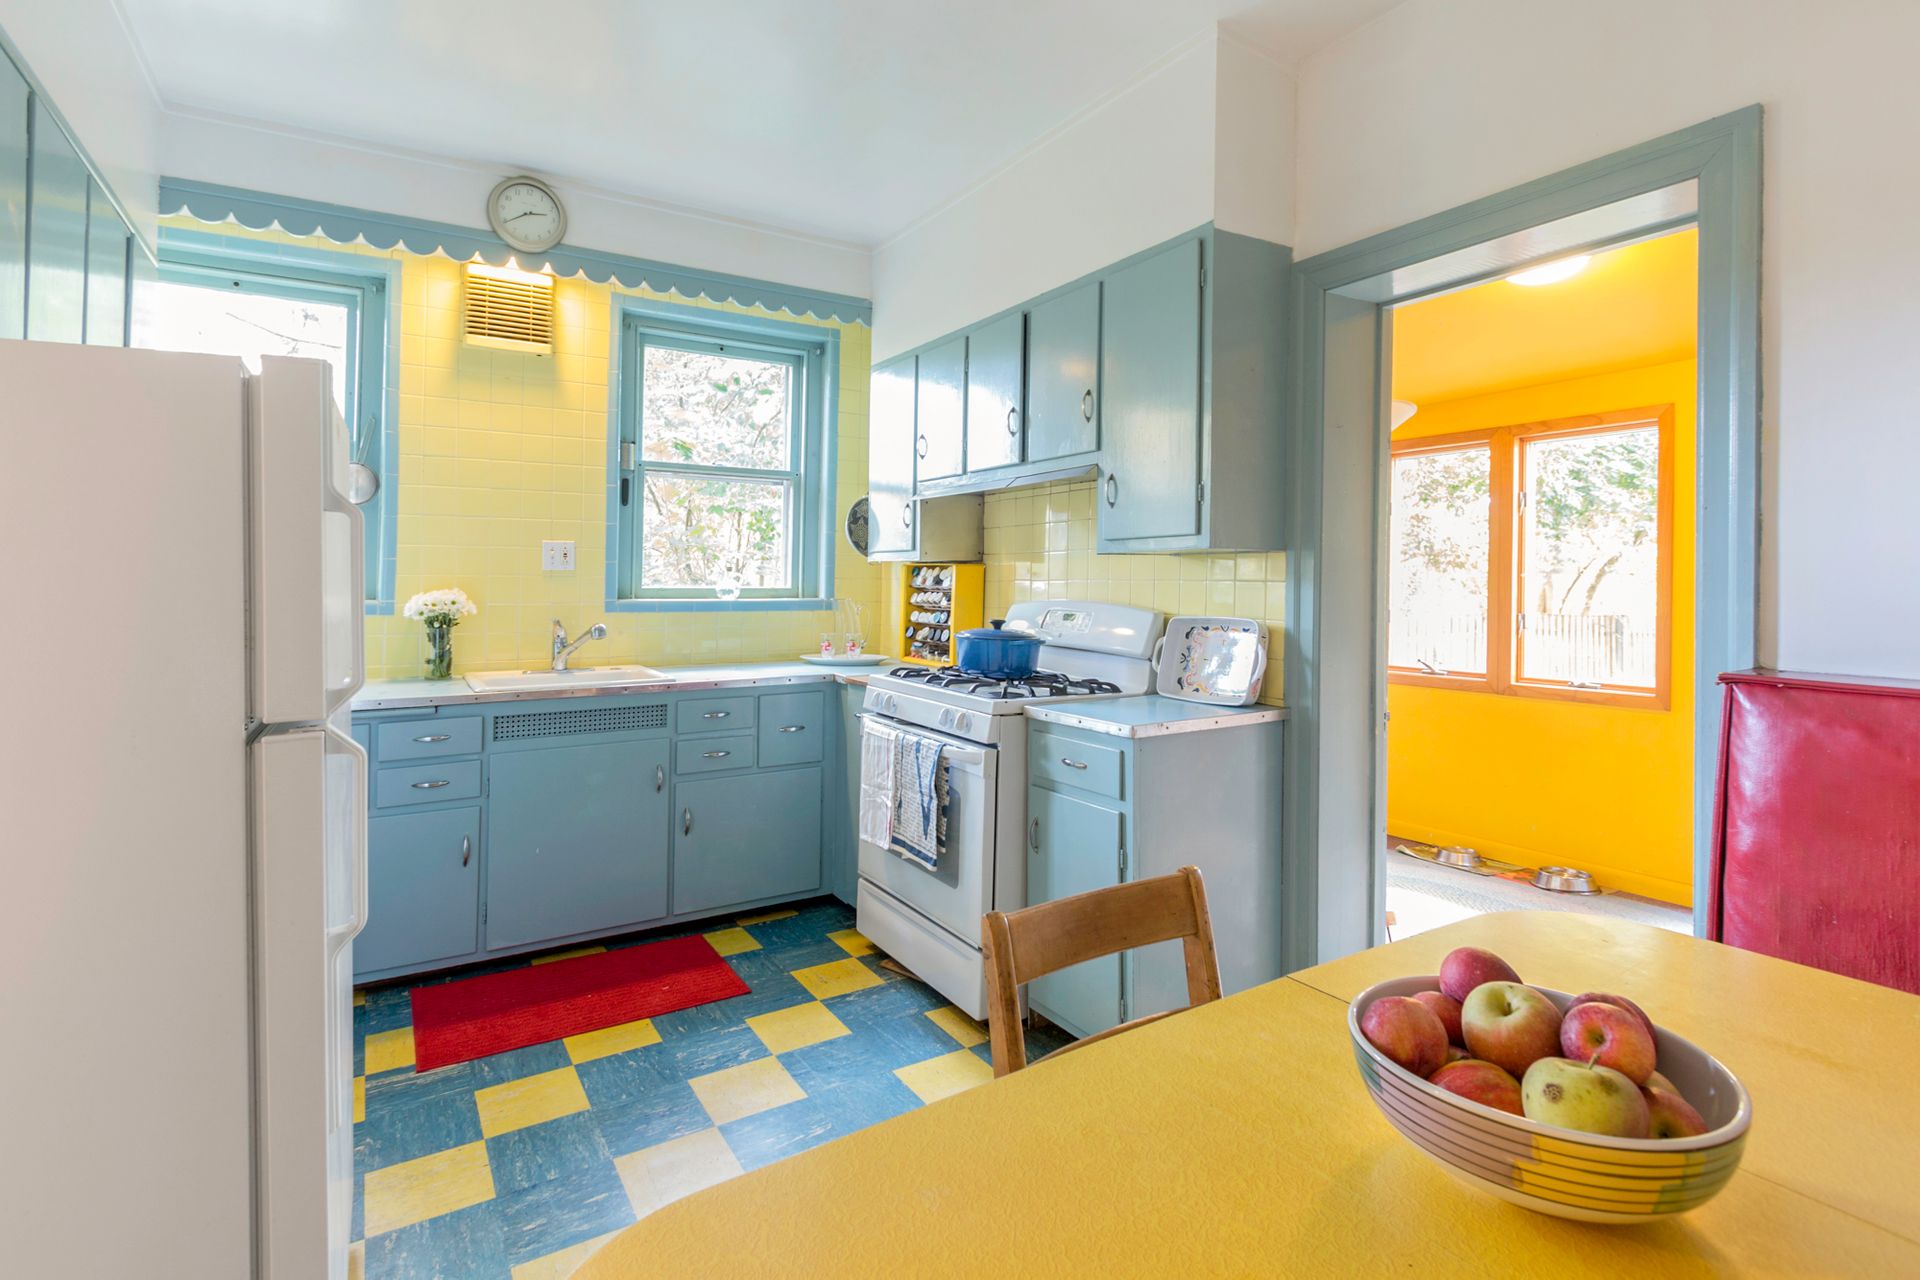 A colorful vintage kitchen with light blue cabinetry and yellow walls. 